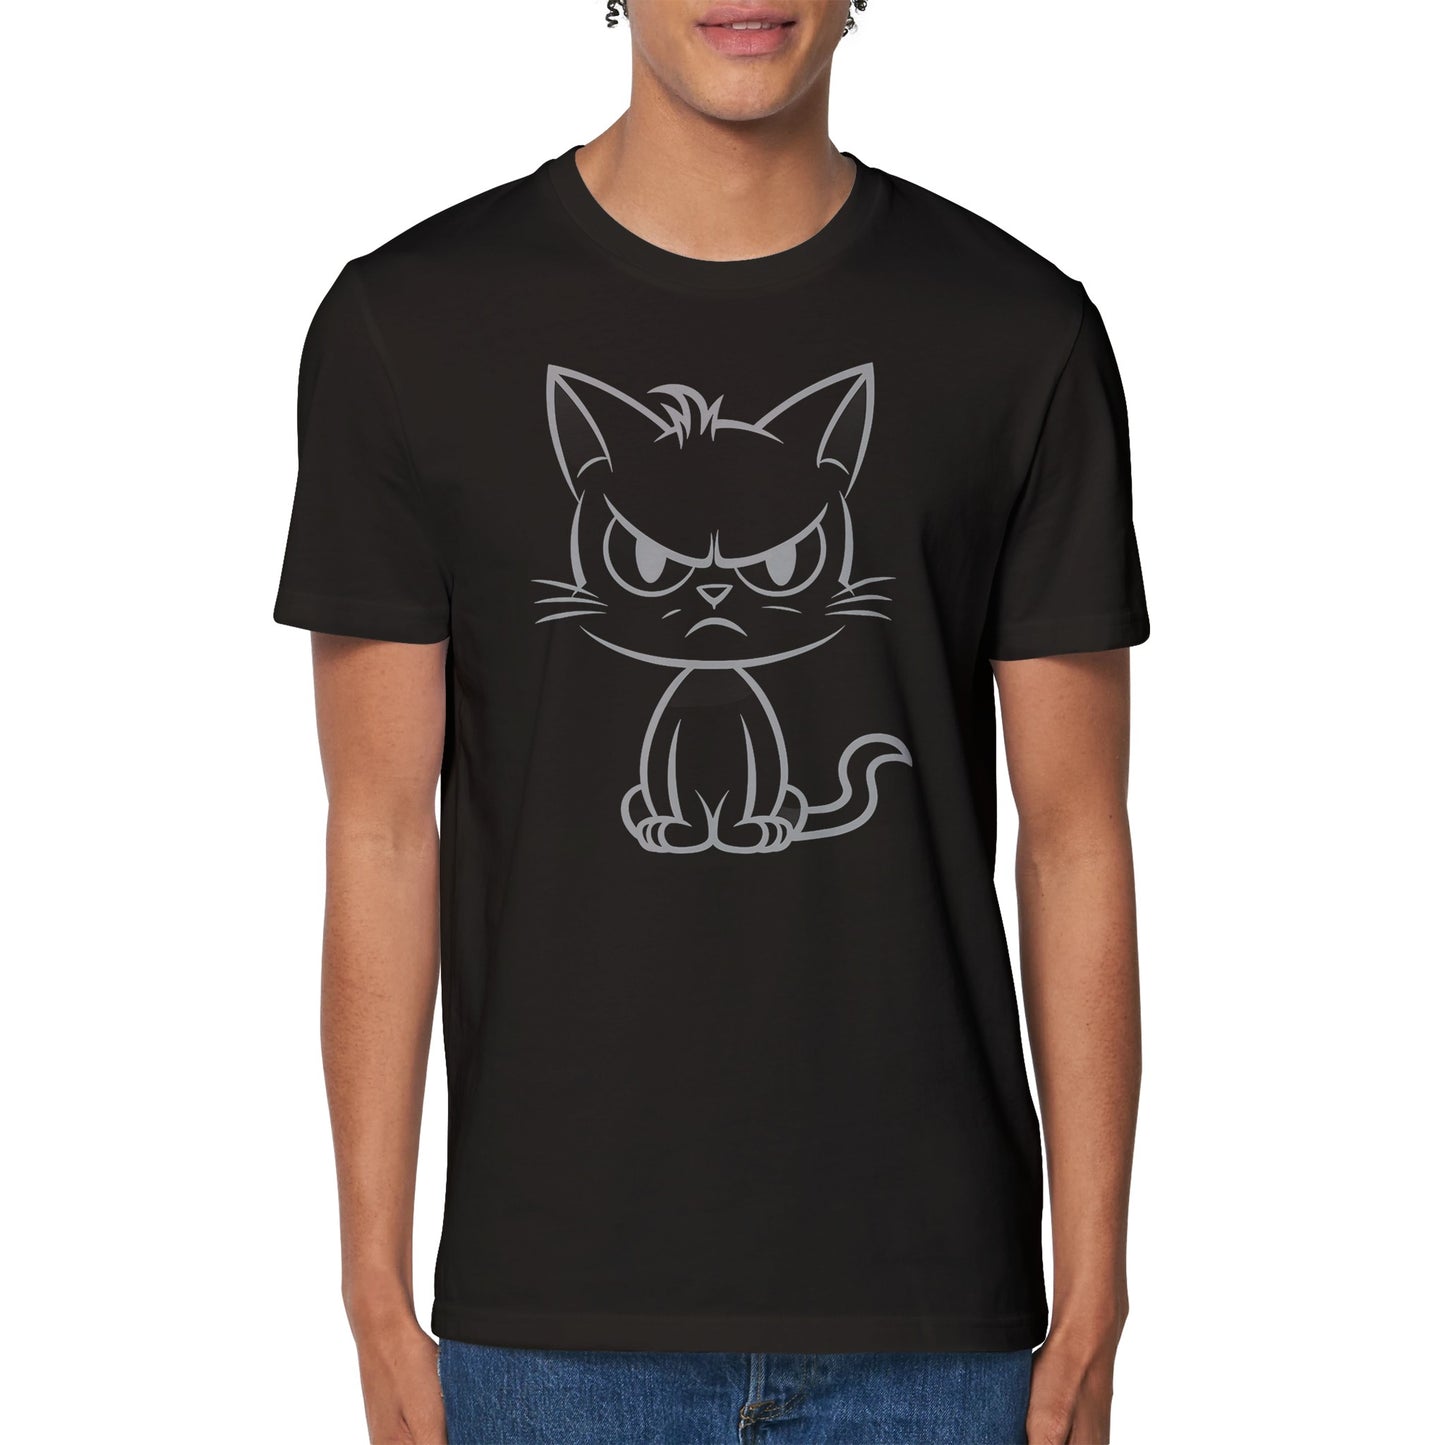 Express Yourself: Moody Cat Organic Tee for Every Mood! 😼